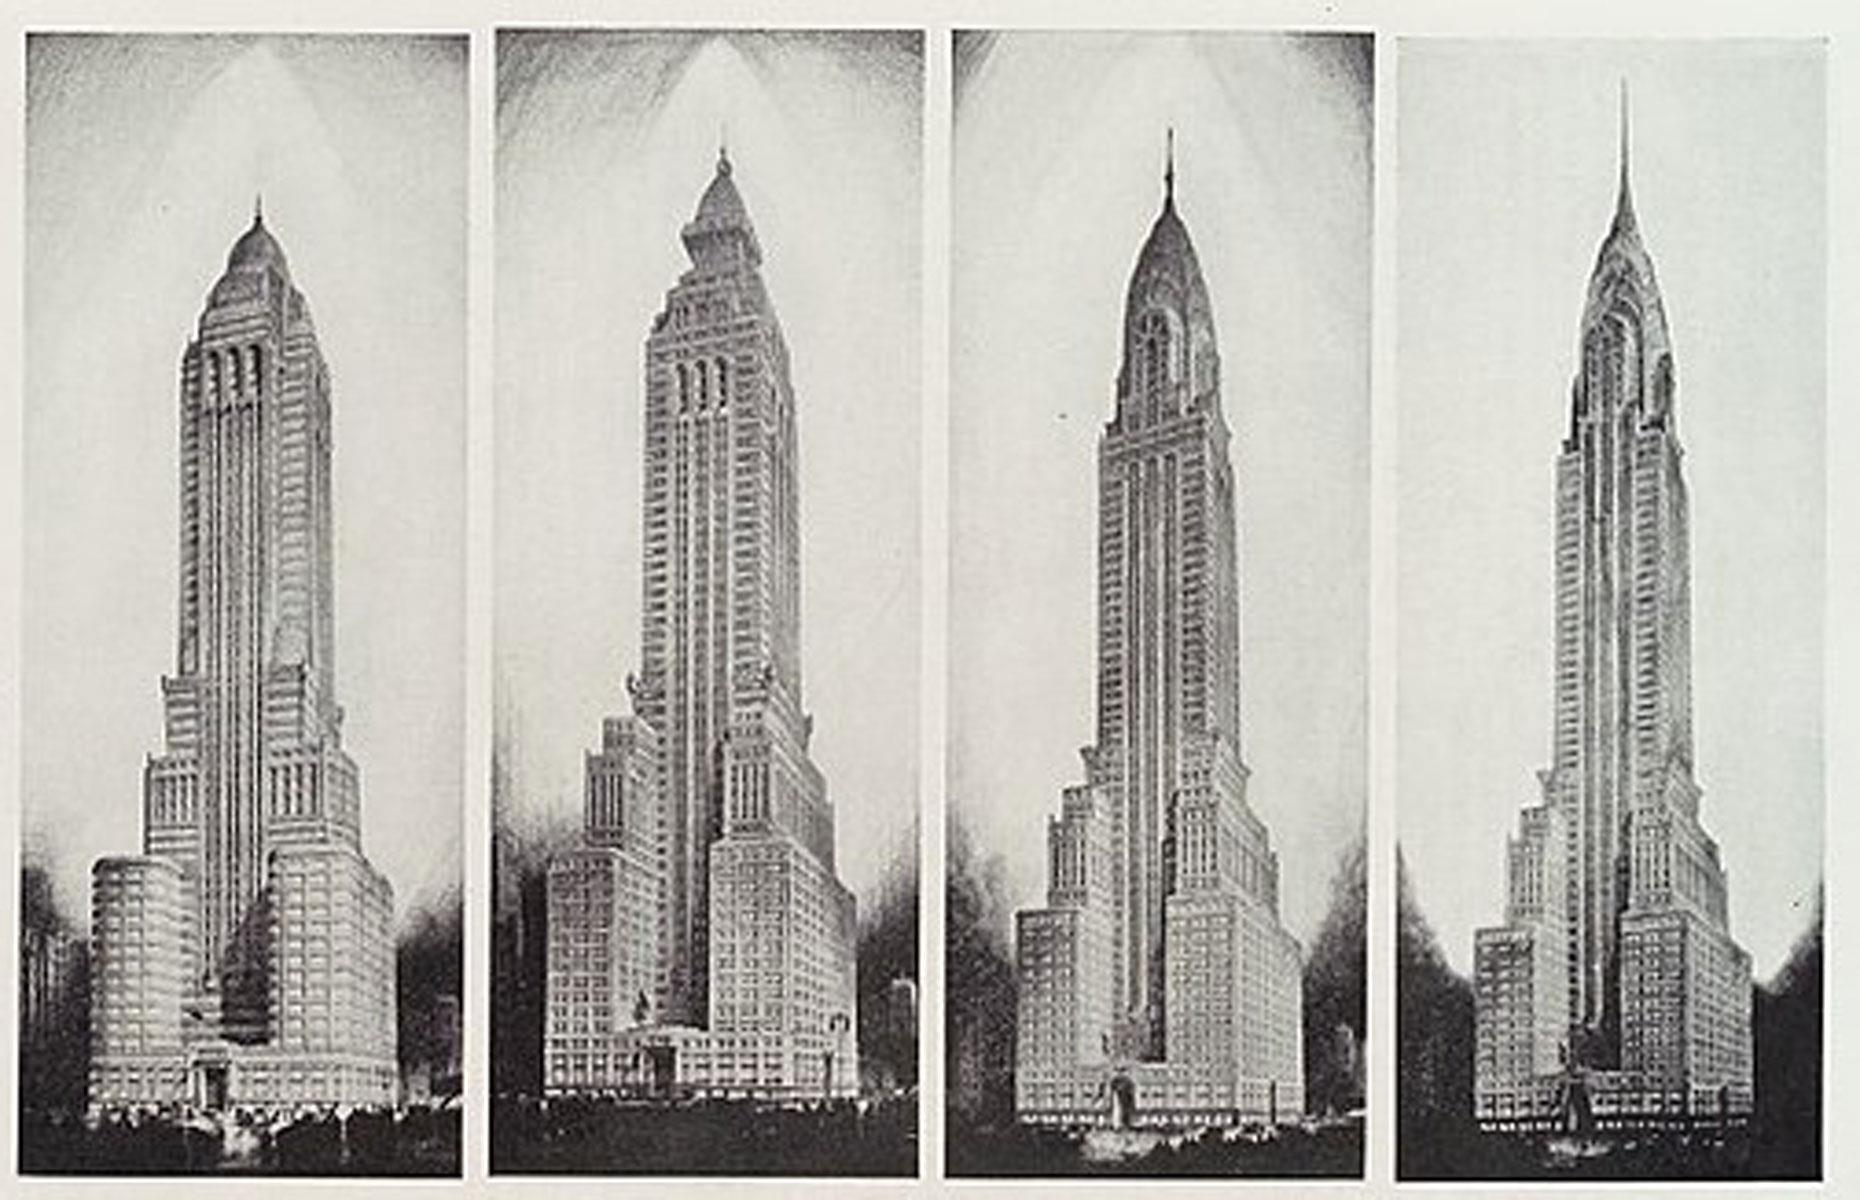 This fascinating series of images shows how the design of the skyscraper was developed and refined by Van Alen. The New York-based architect came up with several designs for the crown of the skyscraper before settling for the terraced design we know today.